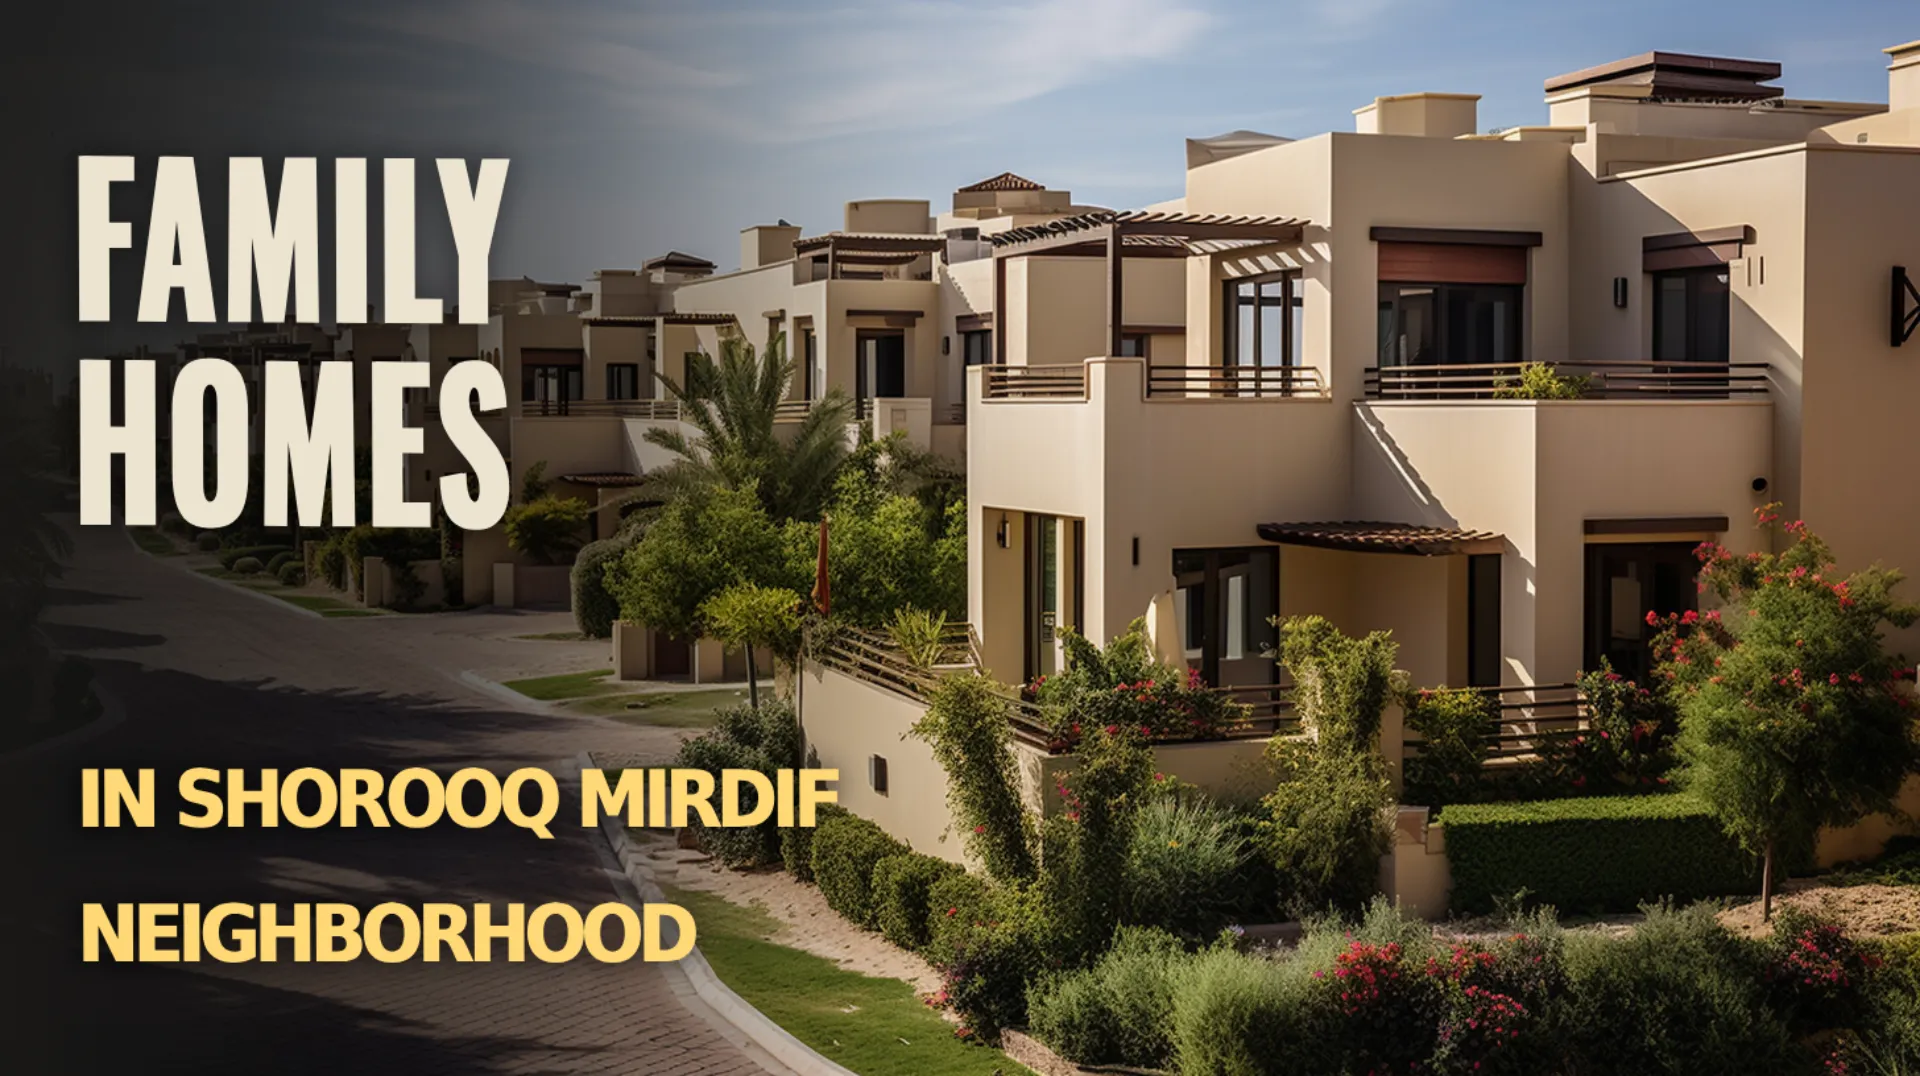 Modern Family Homes in Mirdif